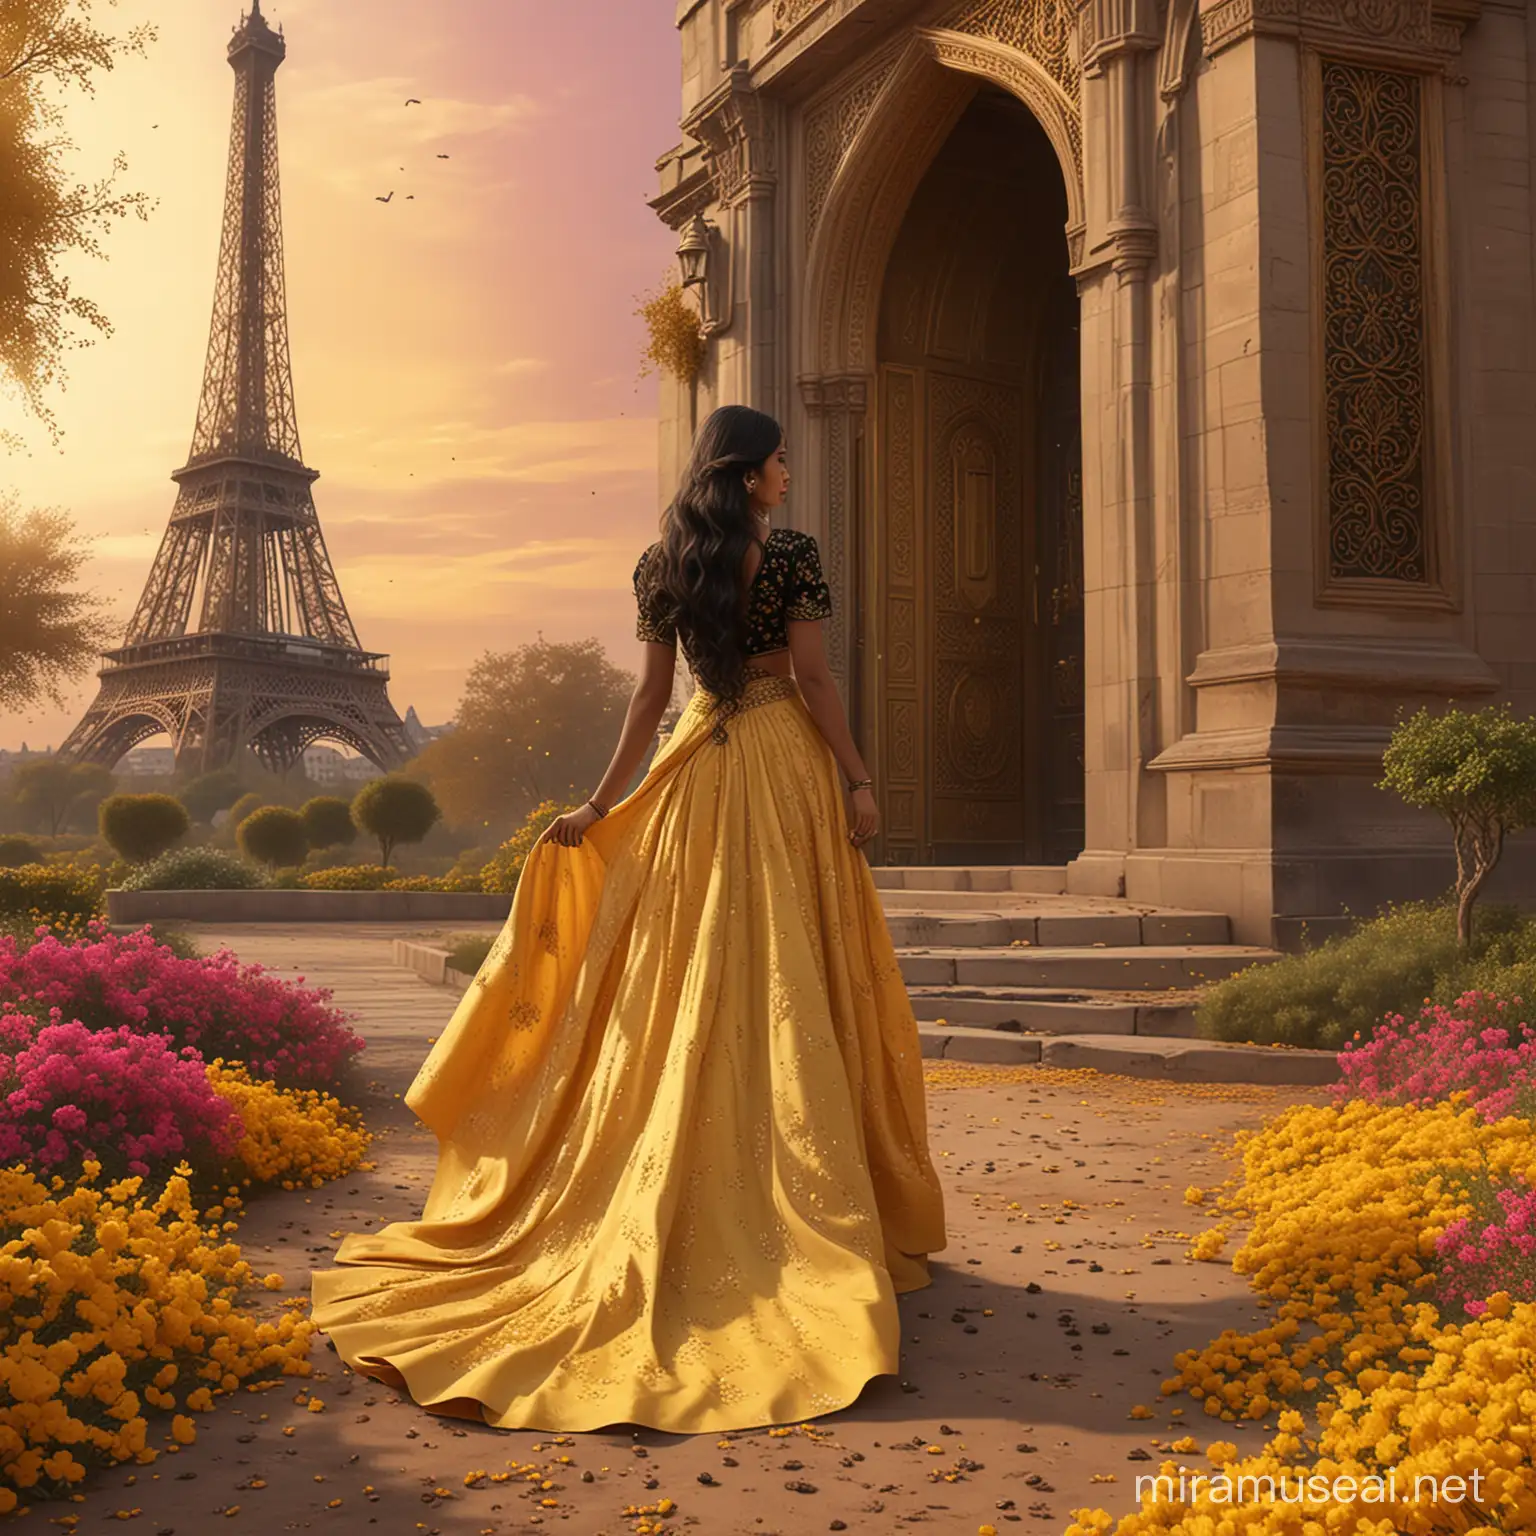 A beautiful indian princess, with a highly detailed dress, from behind, walking to an opened golden arabian door, surrounded by dark yellow flowers and dark pink dust on the ground. Long wavy black hair. Elegant long dark yellow skirt, black top, haute couture, sari tissu. Background tower eiffel view. background floral trees. 8k, fantasy, illustration, digital art, illustration art, fantasy art, fantasy style